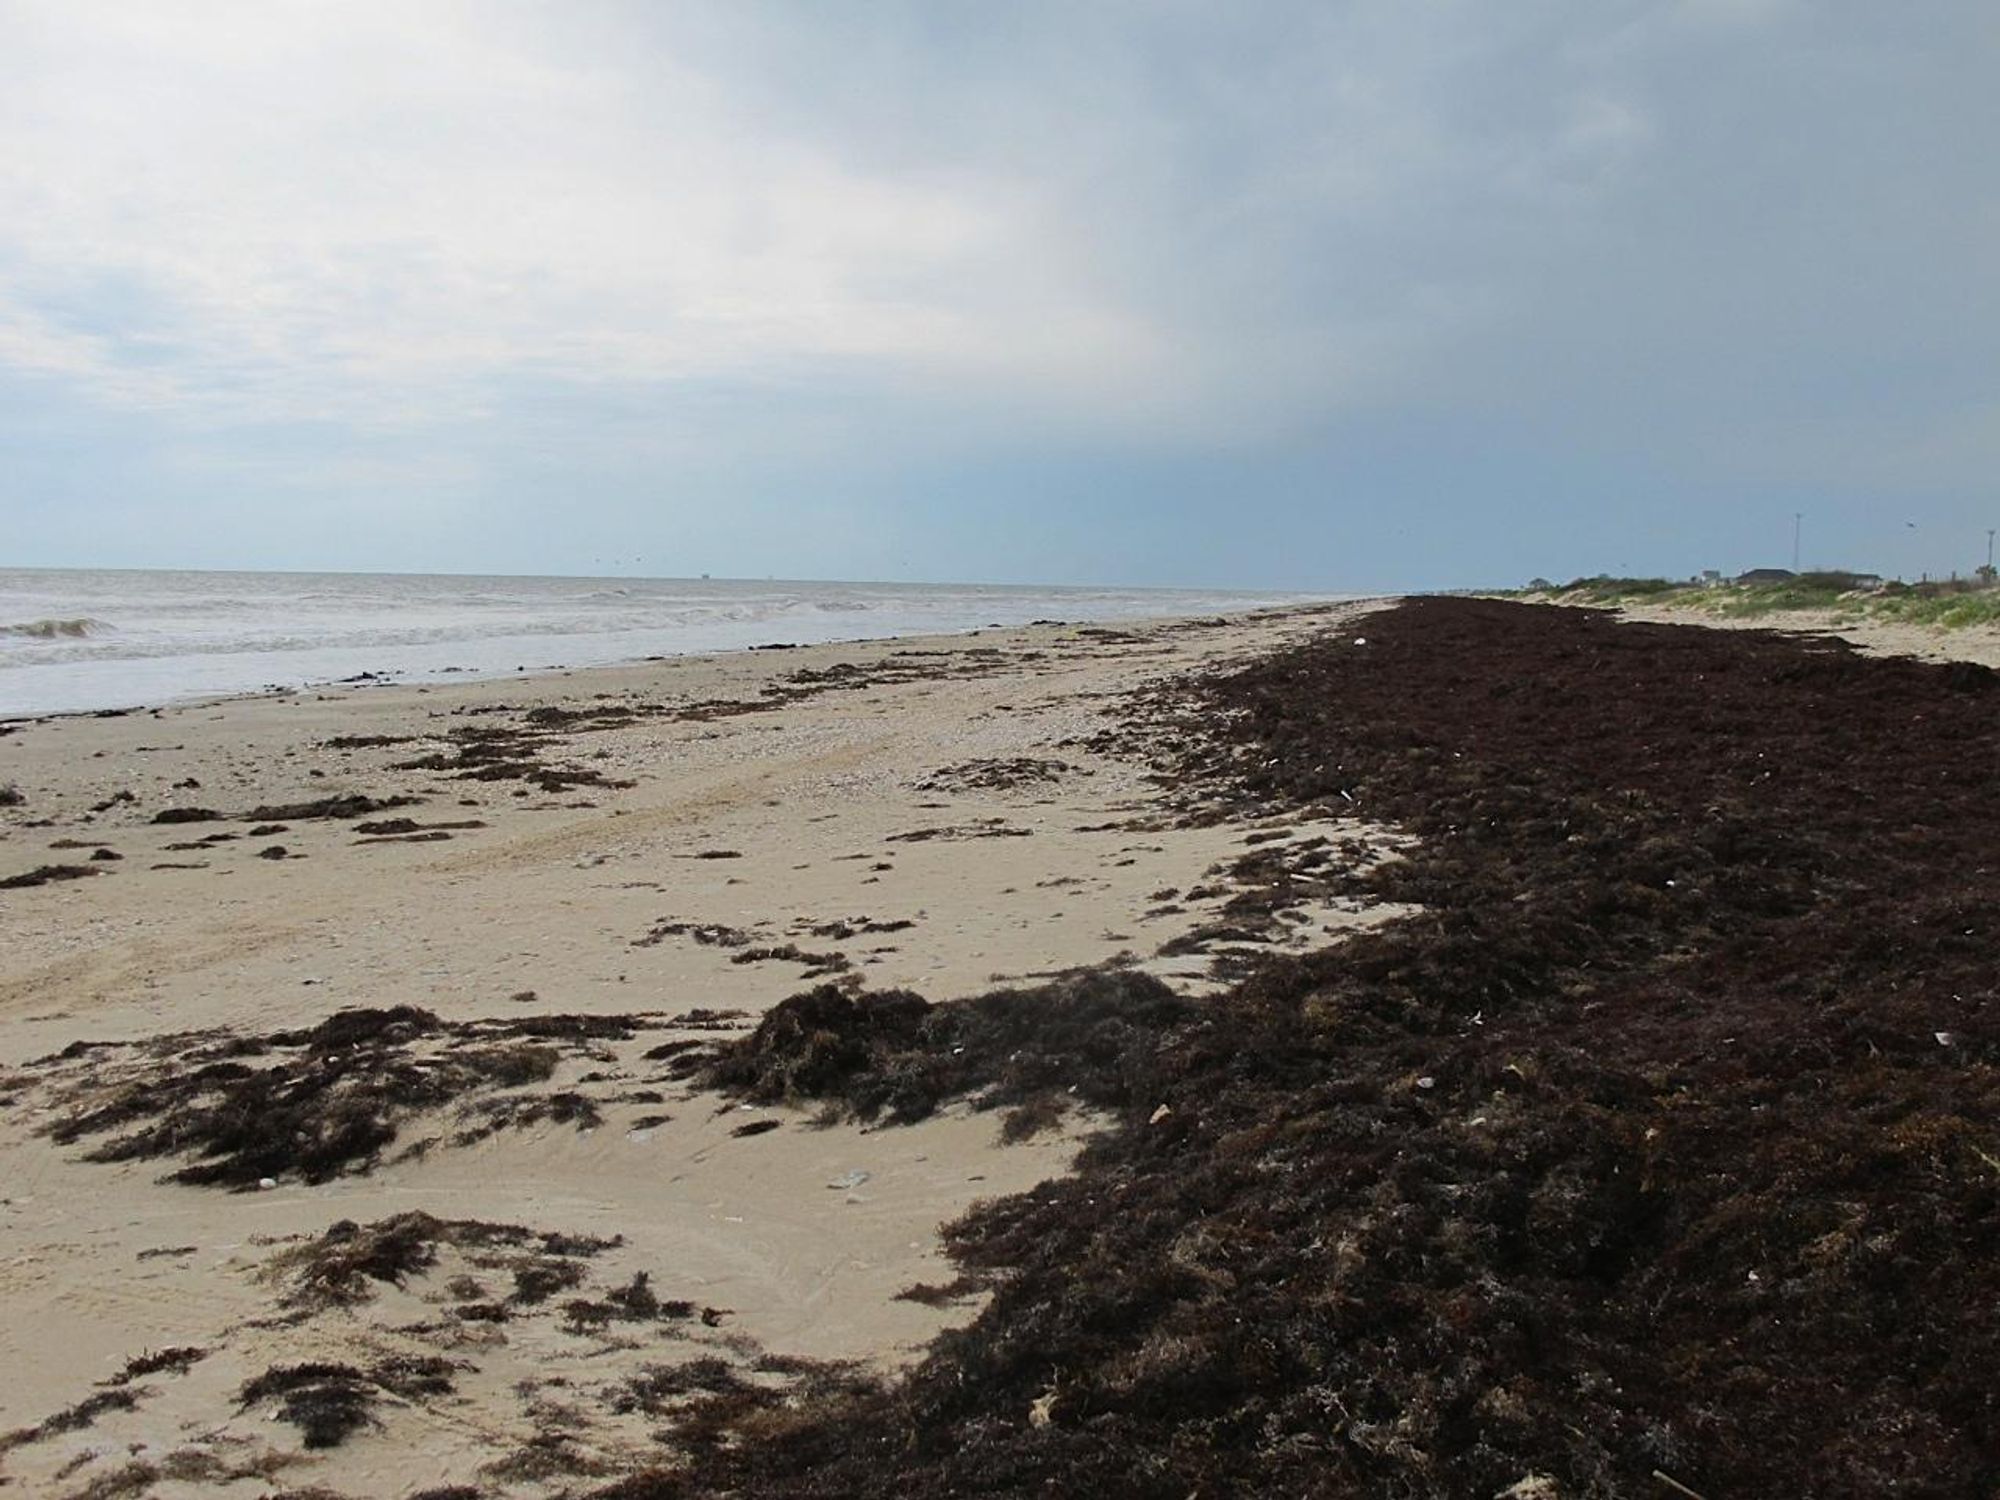 Katie Oxford seaweed April 2015 After a storm, it blanketed the beach like wet draperies